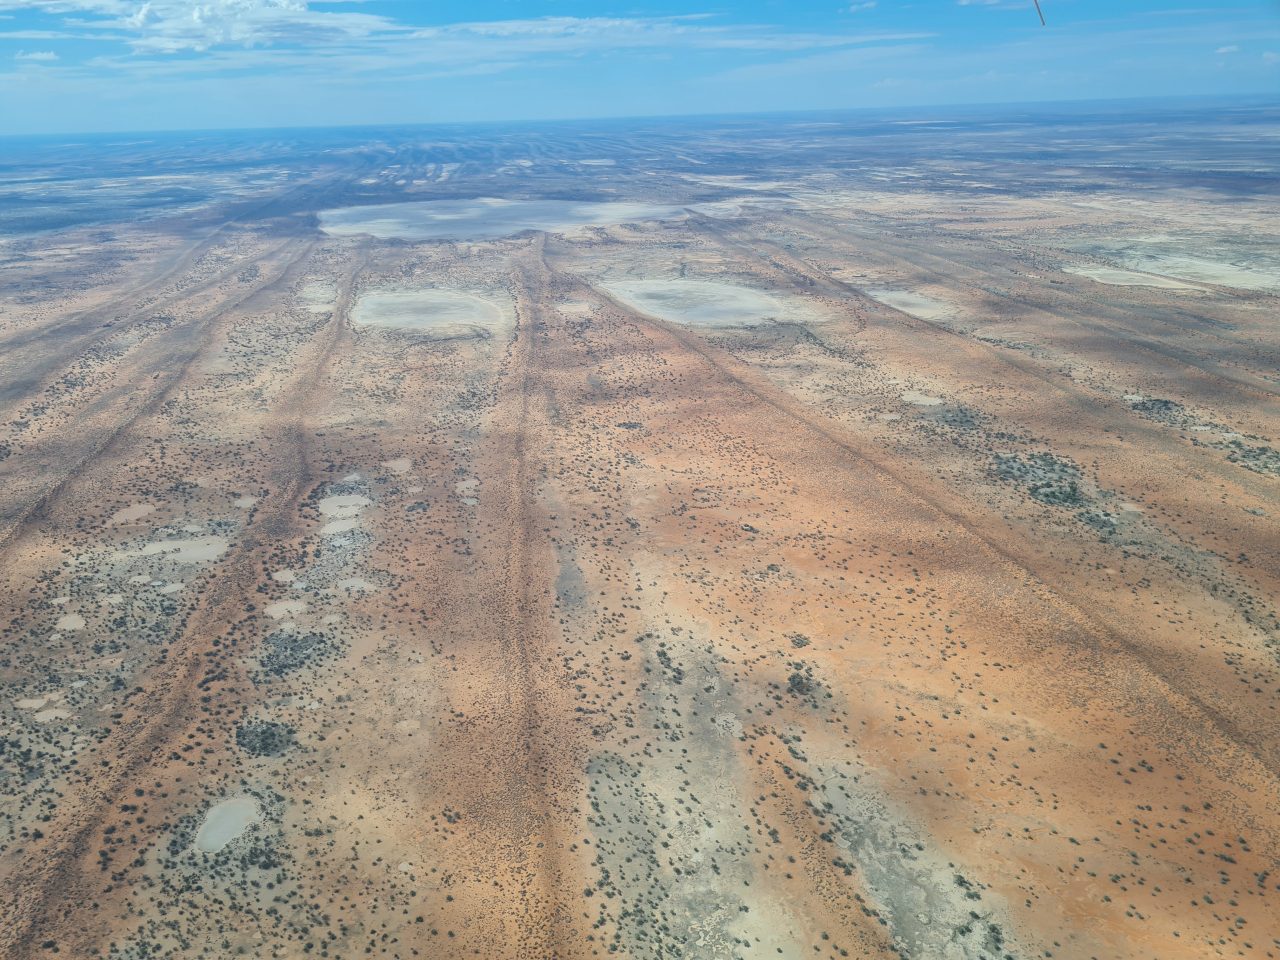 Aerial photo of outback Queensland. Long almost straight sand dunes are lined up with dry grey lakes lying between them. Sparse vegetation is also clustered between the orange sand dunes. Sky is blue and clouds are very high.